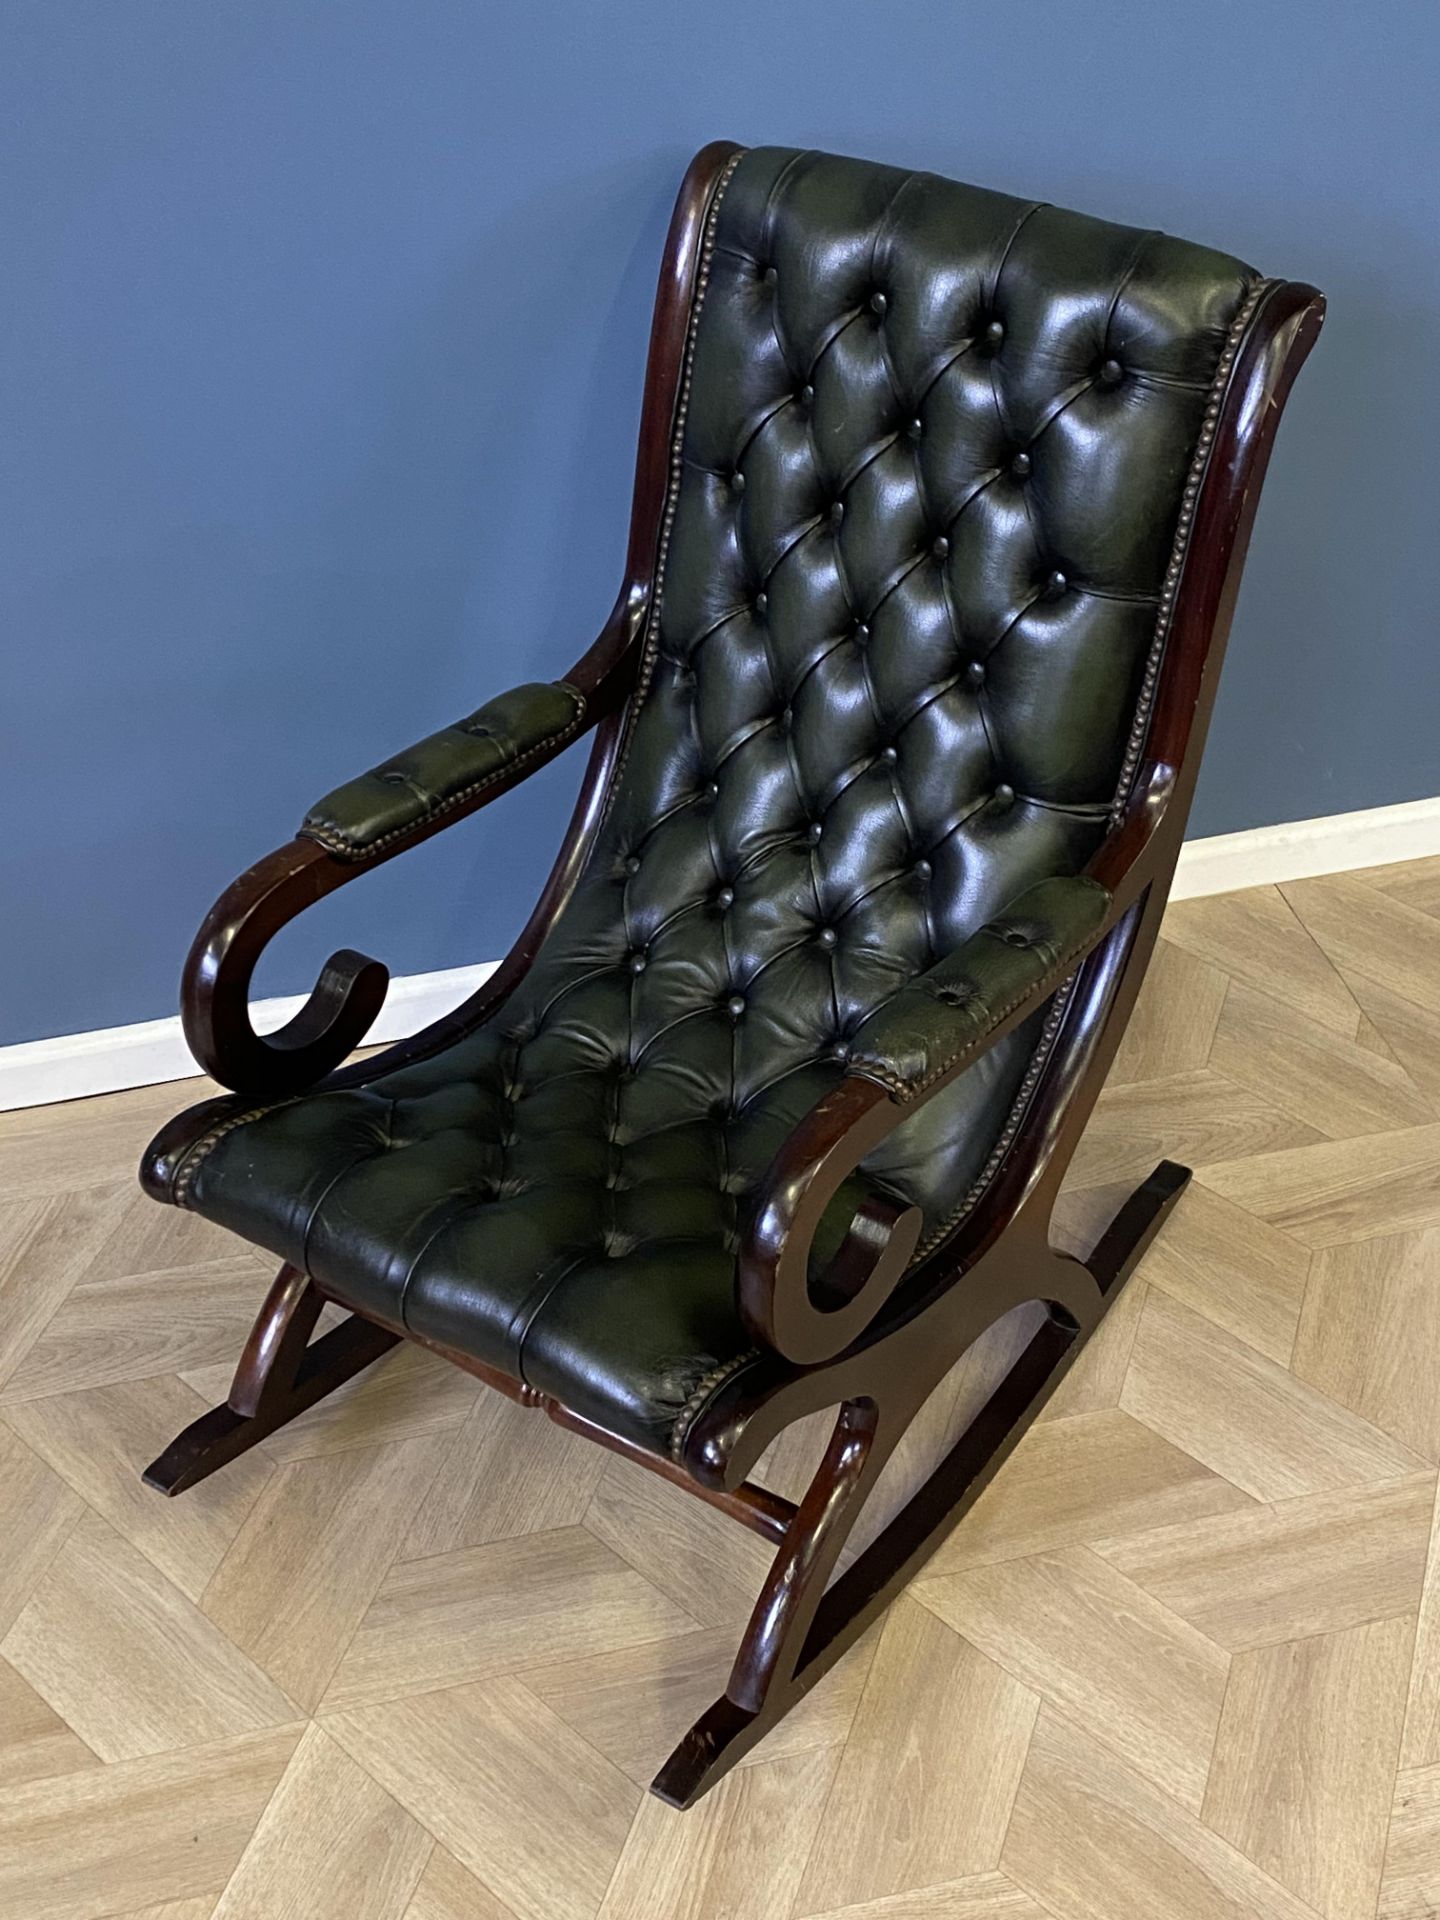 Mahogany framed green leather button back rocking chair - Image 3 of 6